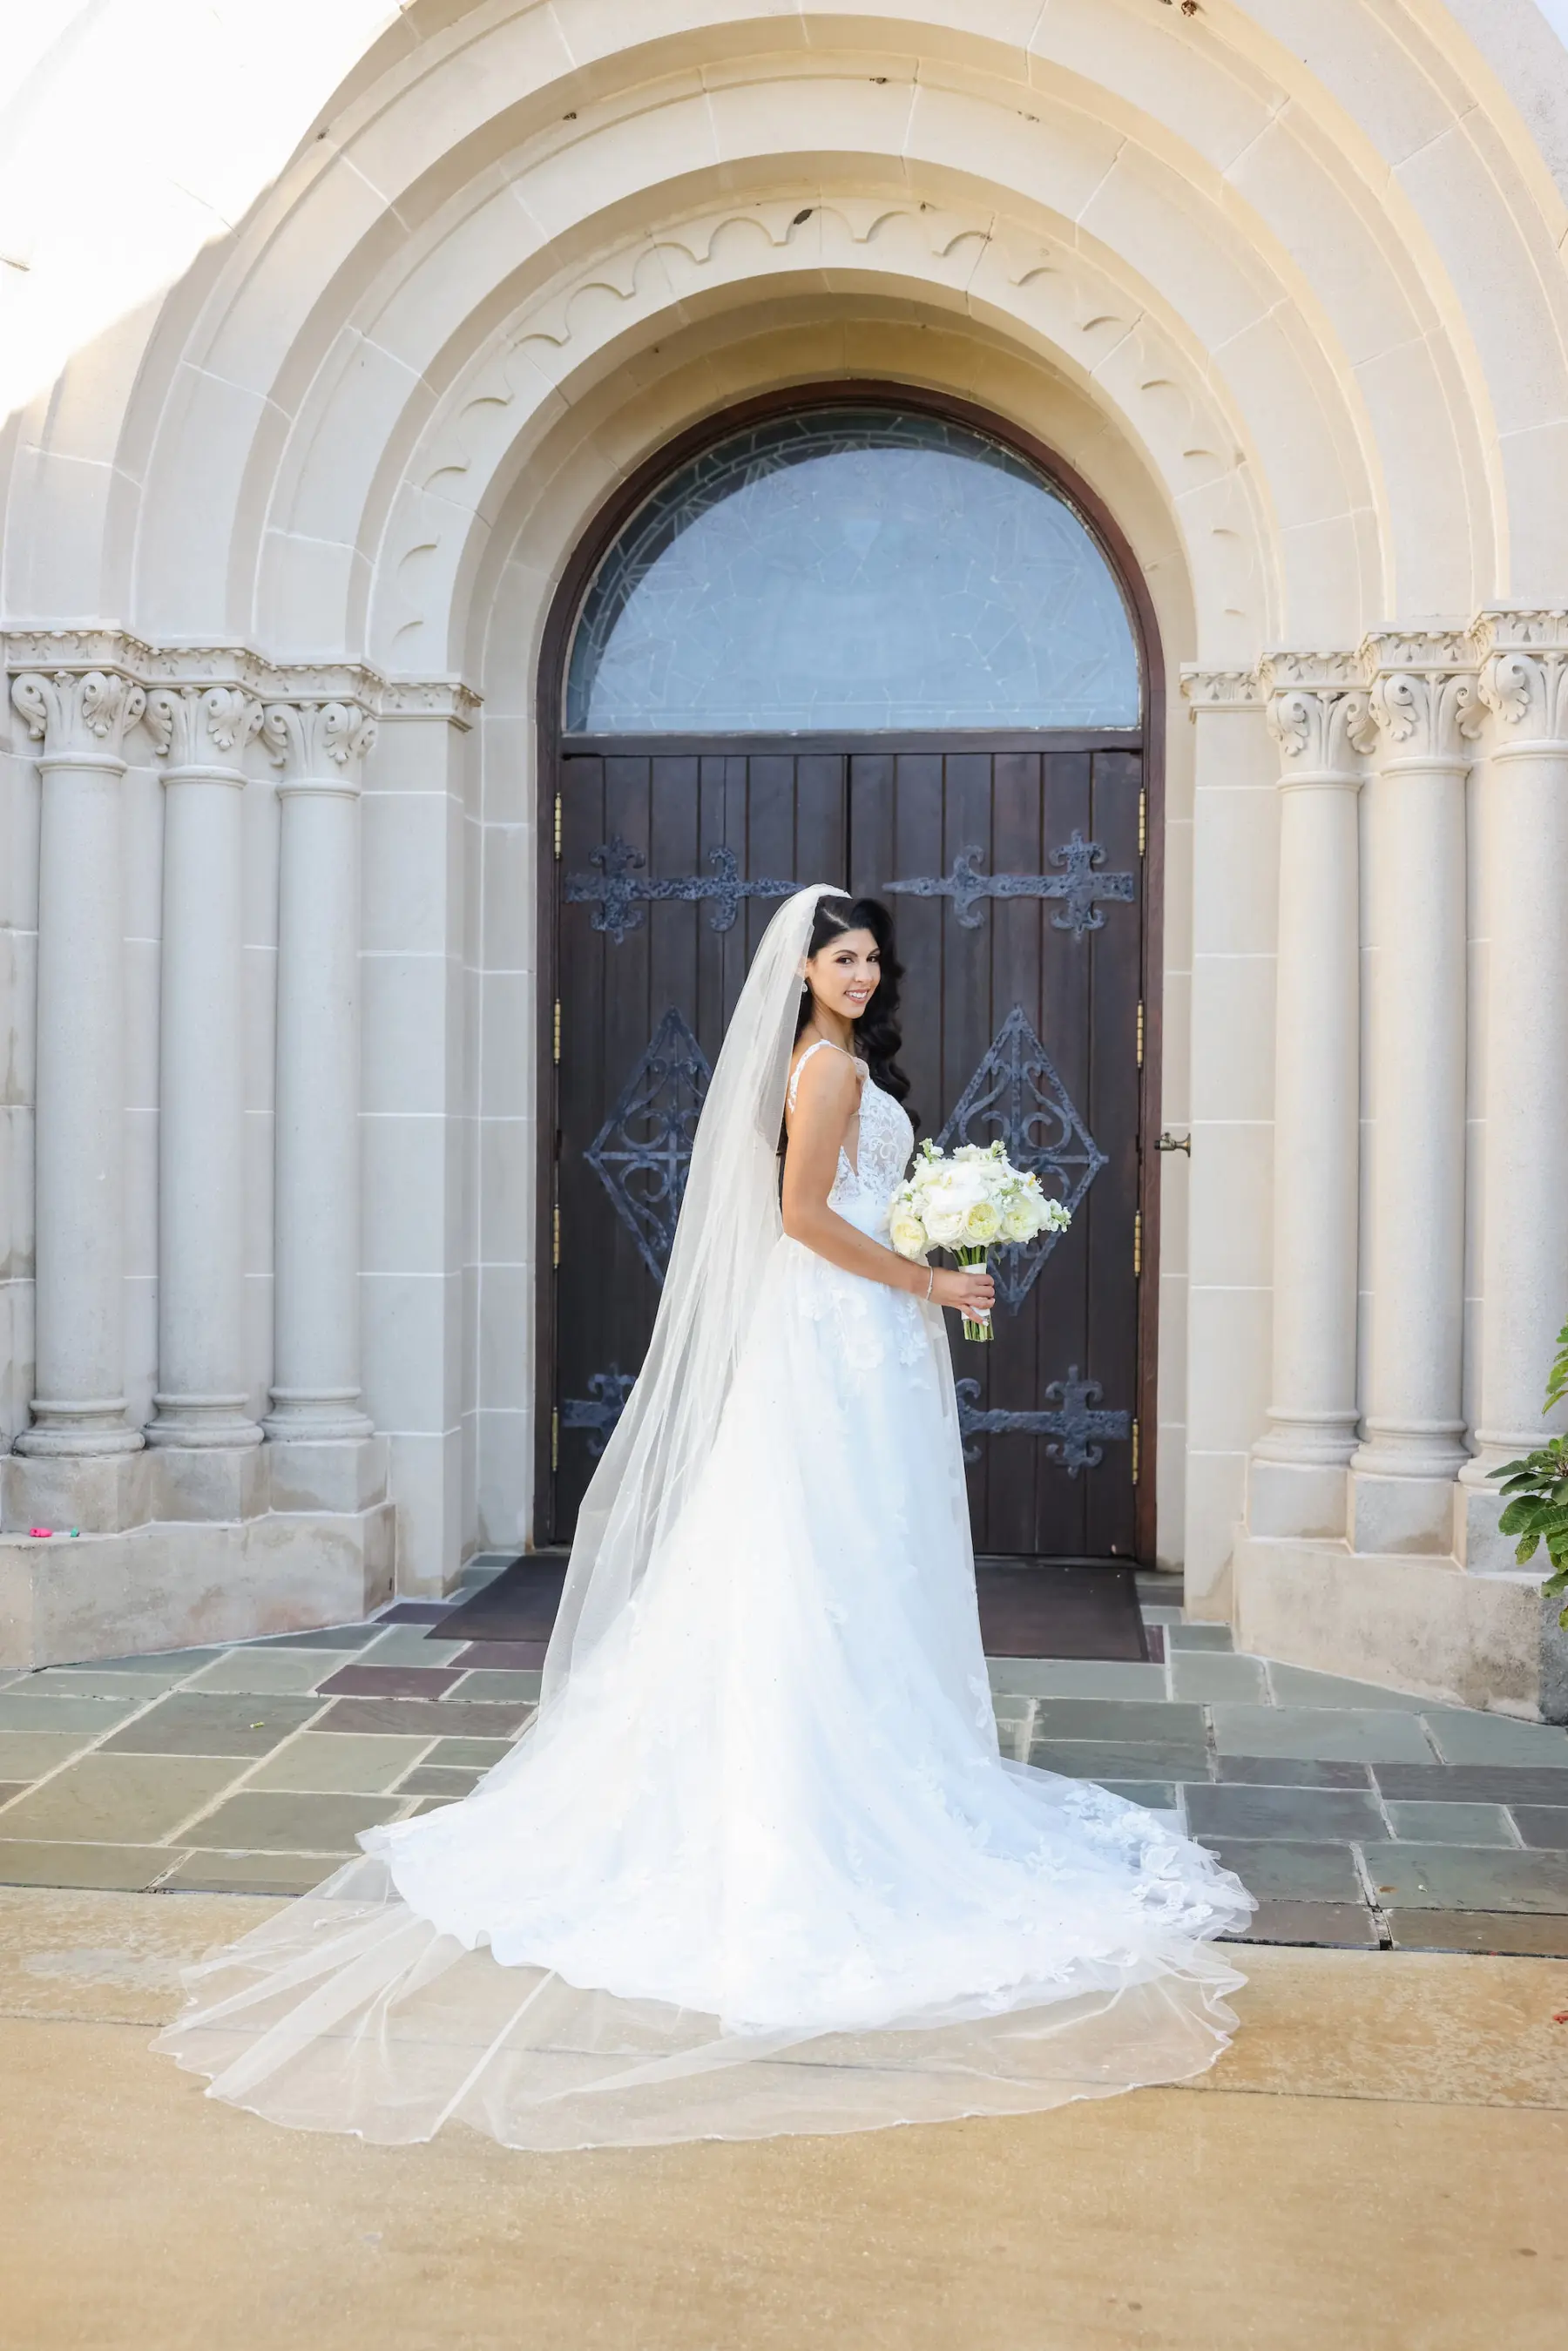 Ivory Lace and Tulle A-Line Lilian West Wedding Dress Ideas | Tampa Bay Hair and Makeup Artist Femme Akoi Beauty Studio | Photographer Lifelong Photography Studio